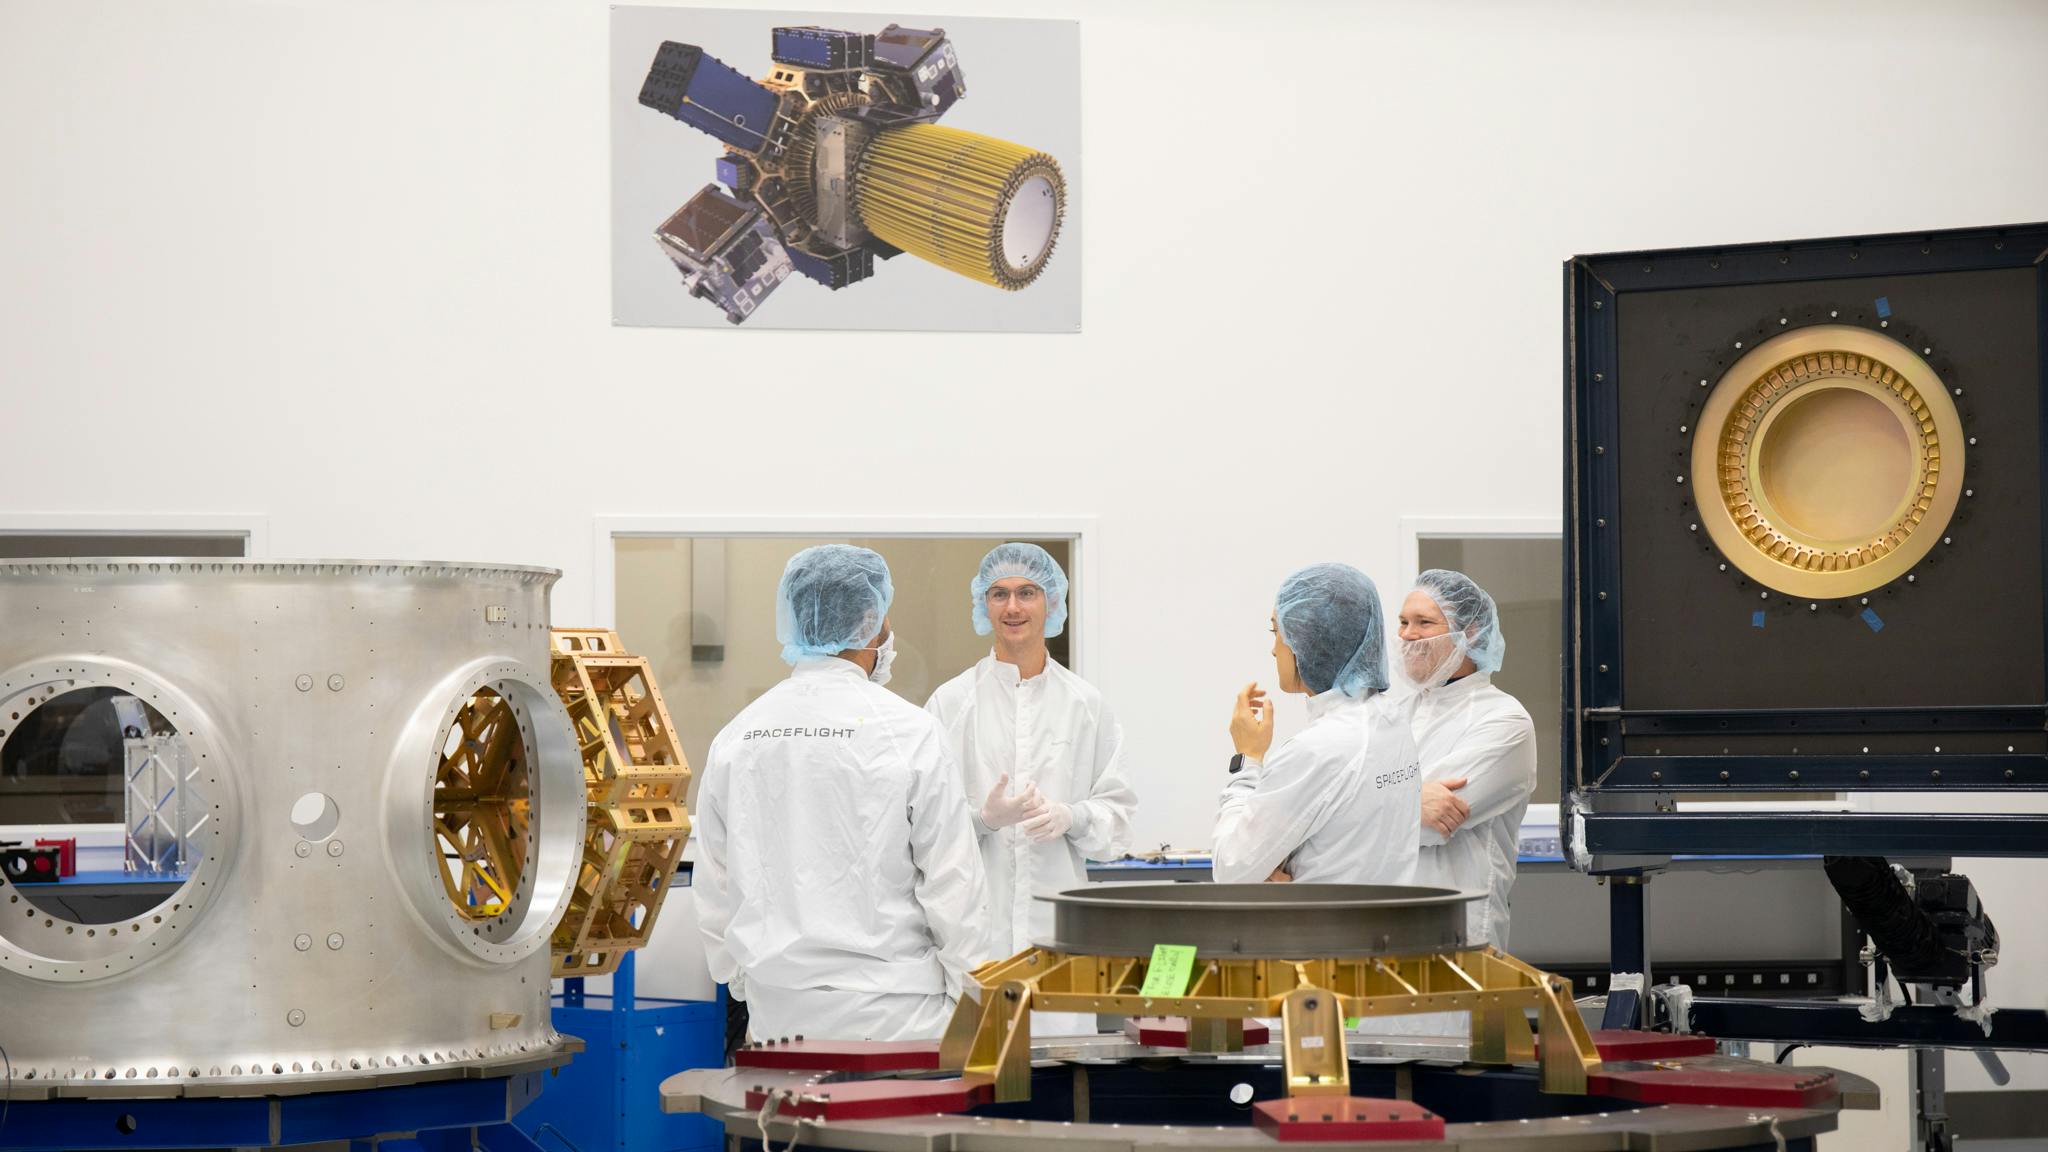 Inside the cleanroom, 4 people in lab coats are in a circle, talking.